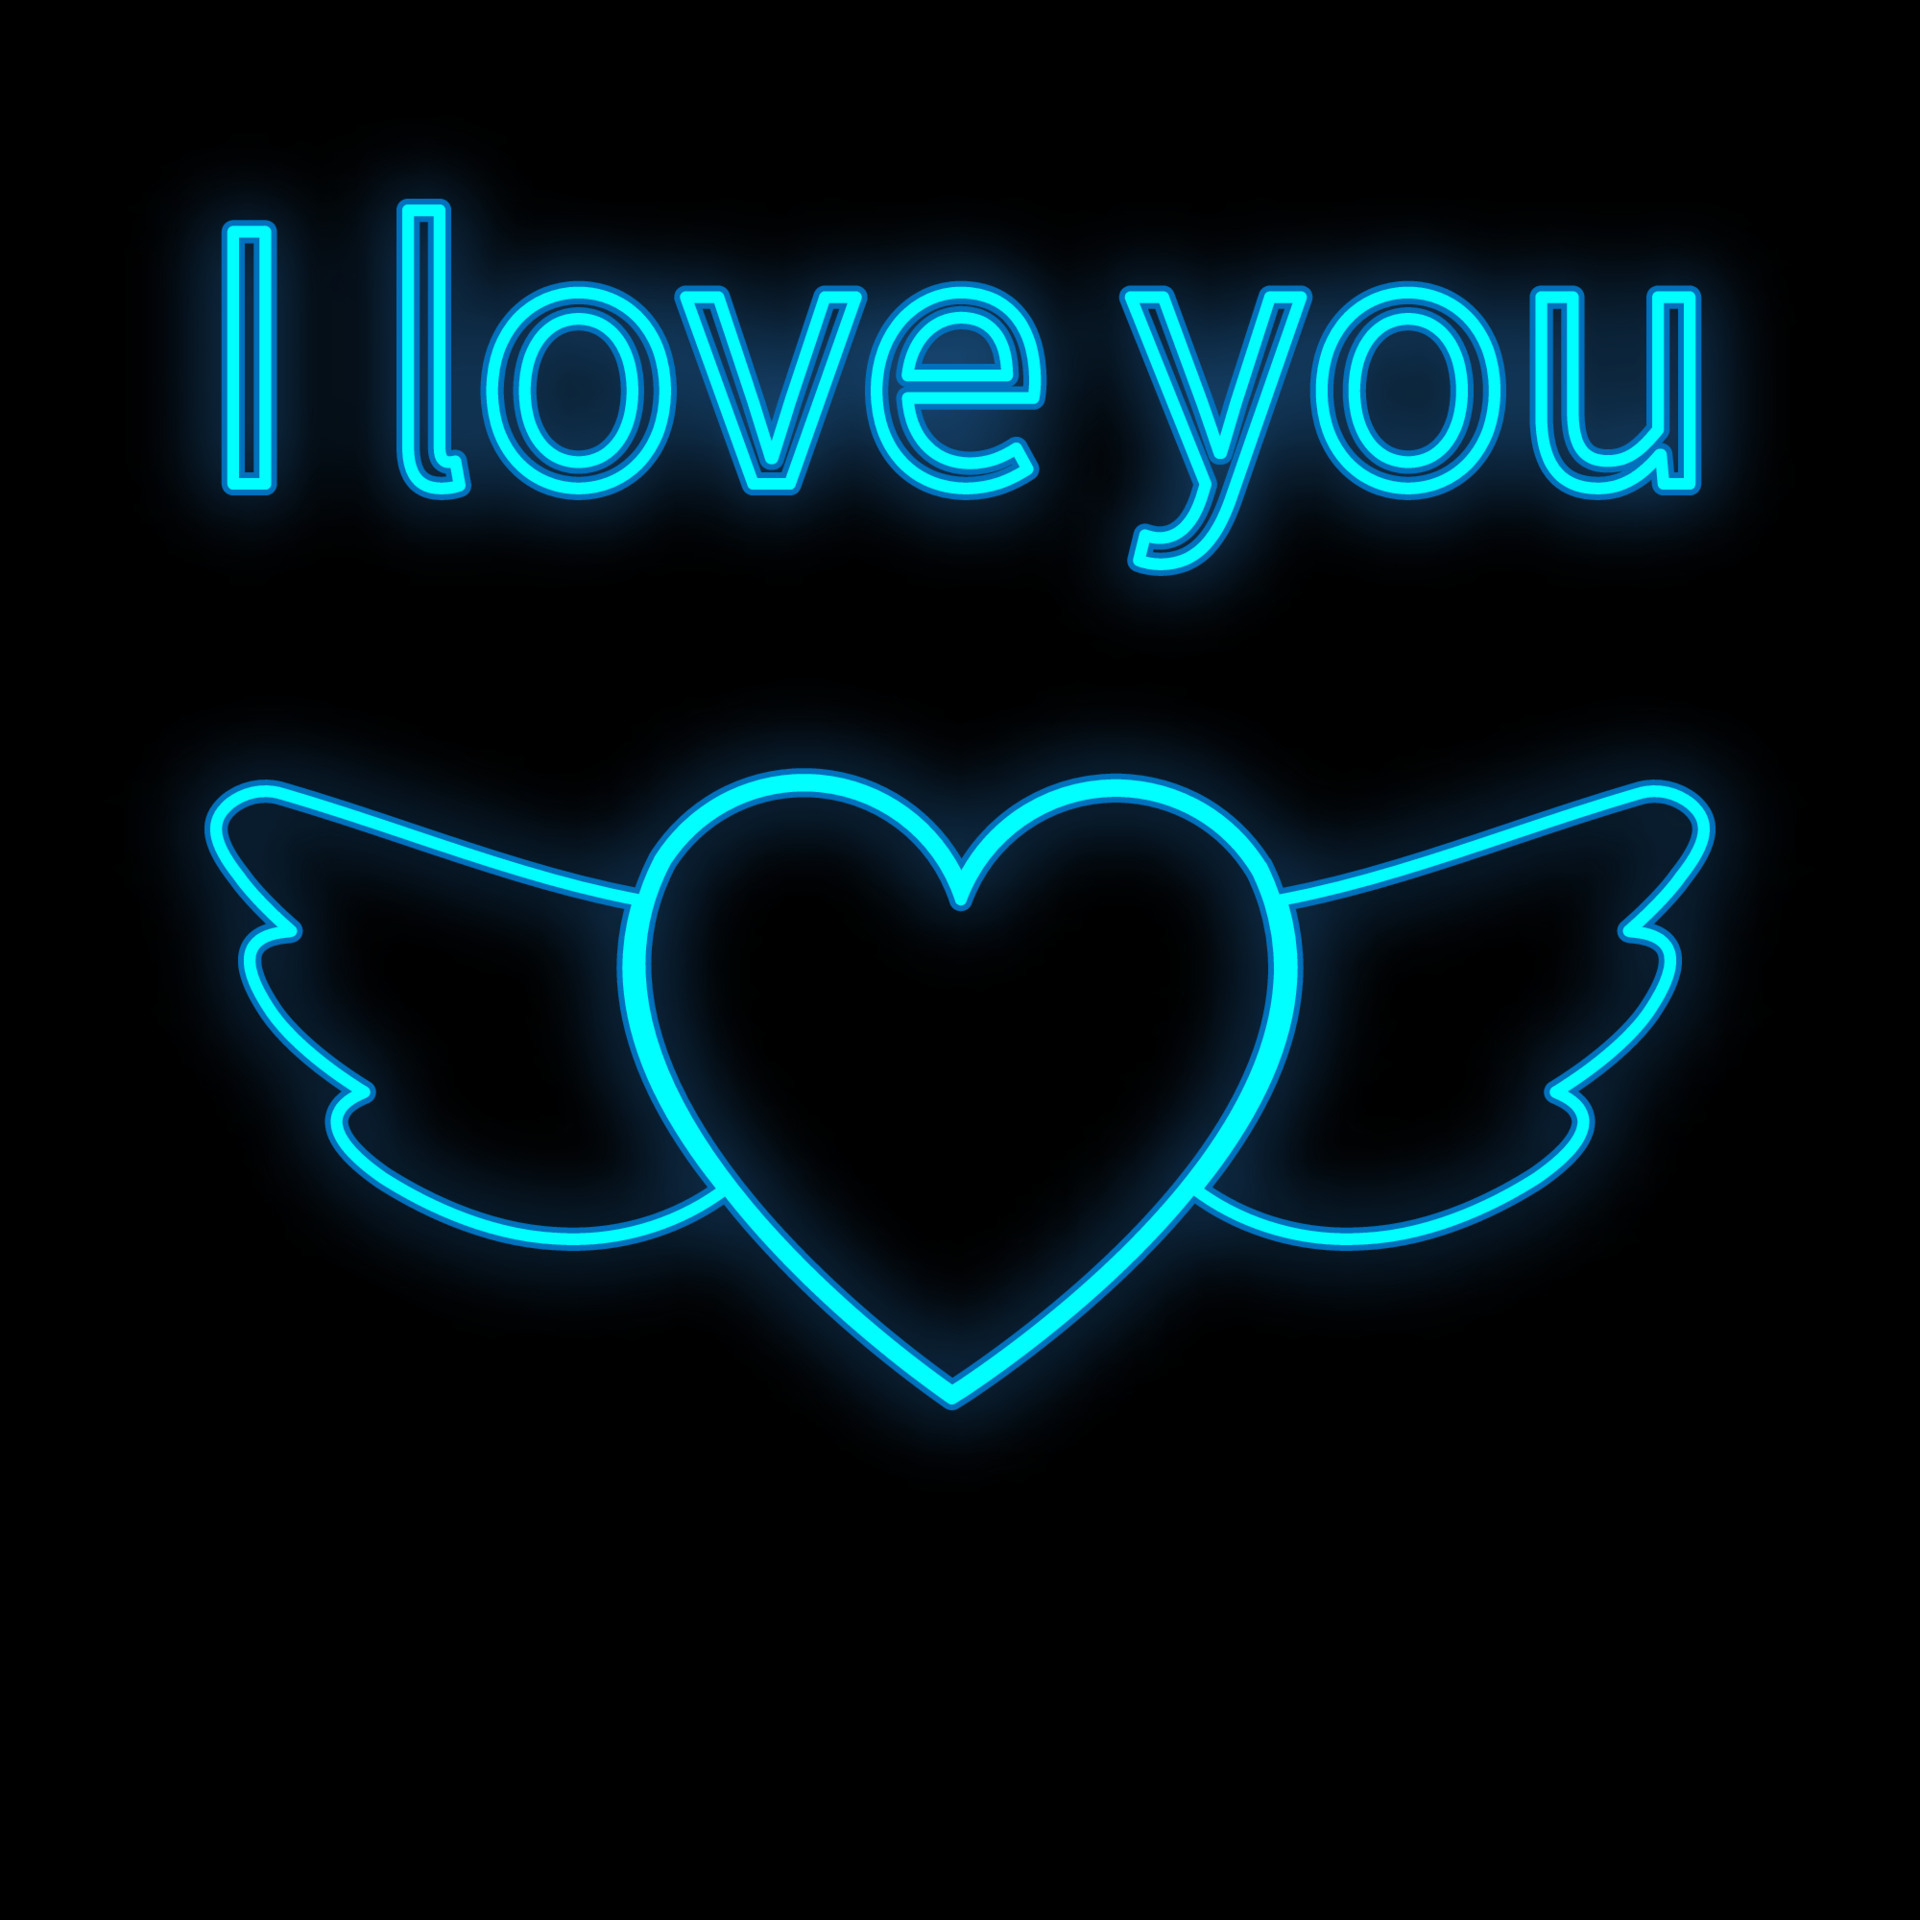 Bright luminous blue festive digital neon sign for a store or card beautiful  shiny with love wings with a heart on a black background with the  inscription I love you. Vector illustration